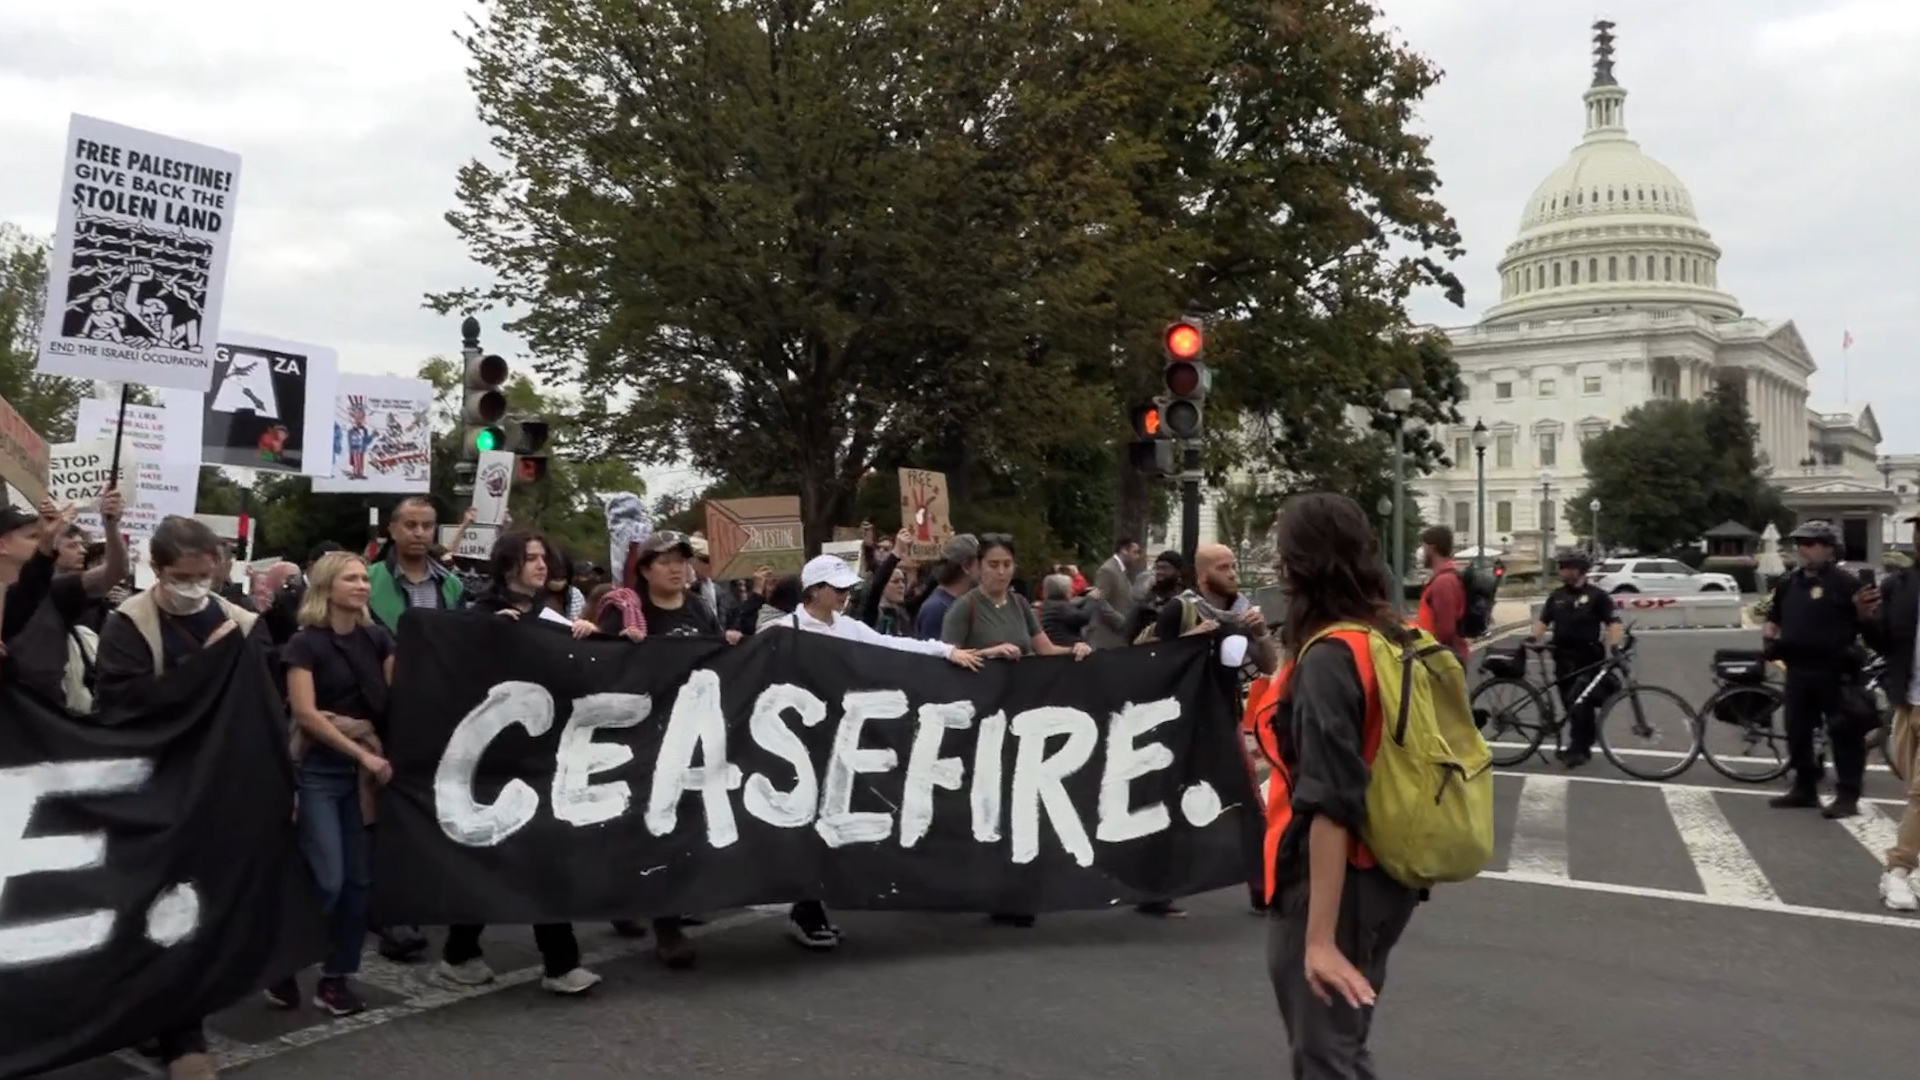 Protesters Rally at US Capitol, Calling for Ceasefire in Israel Conflict